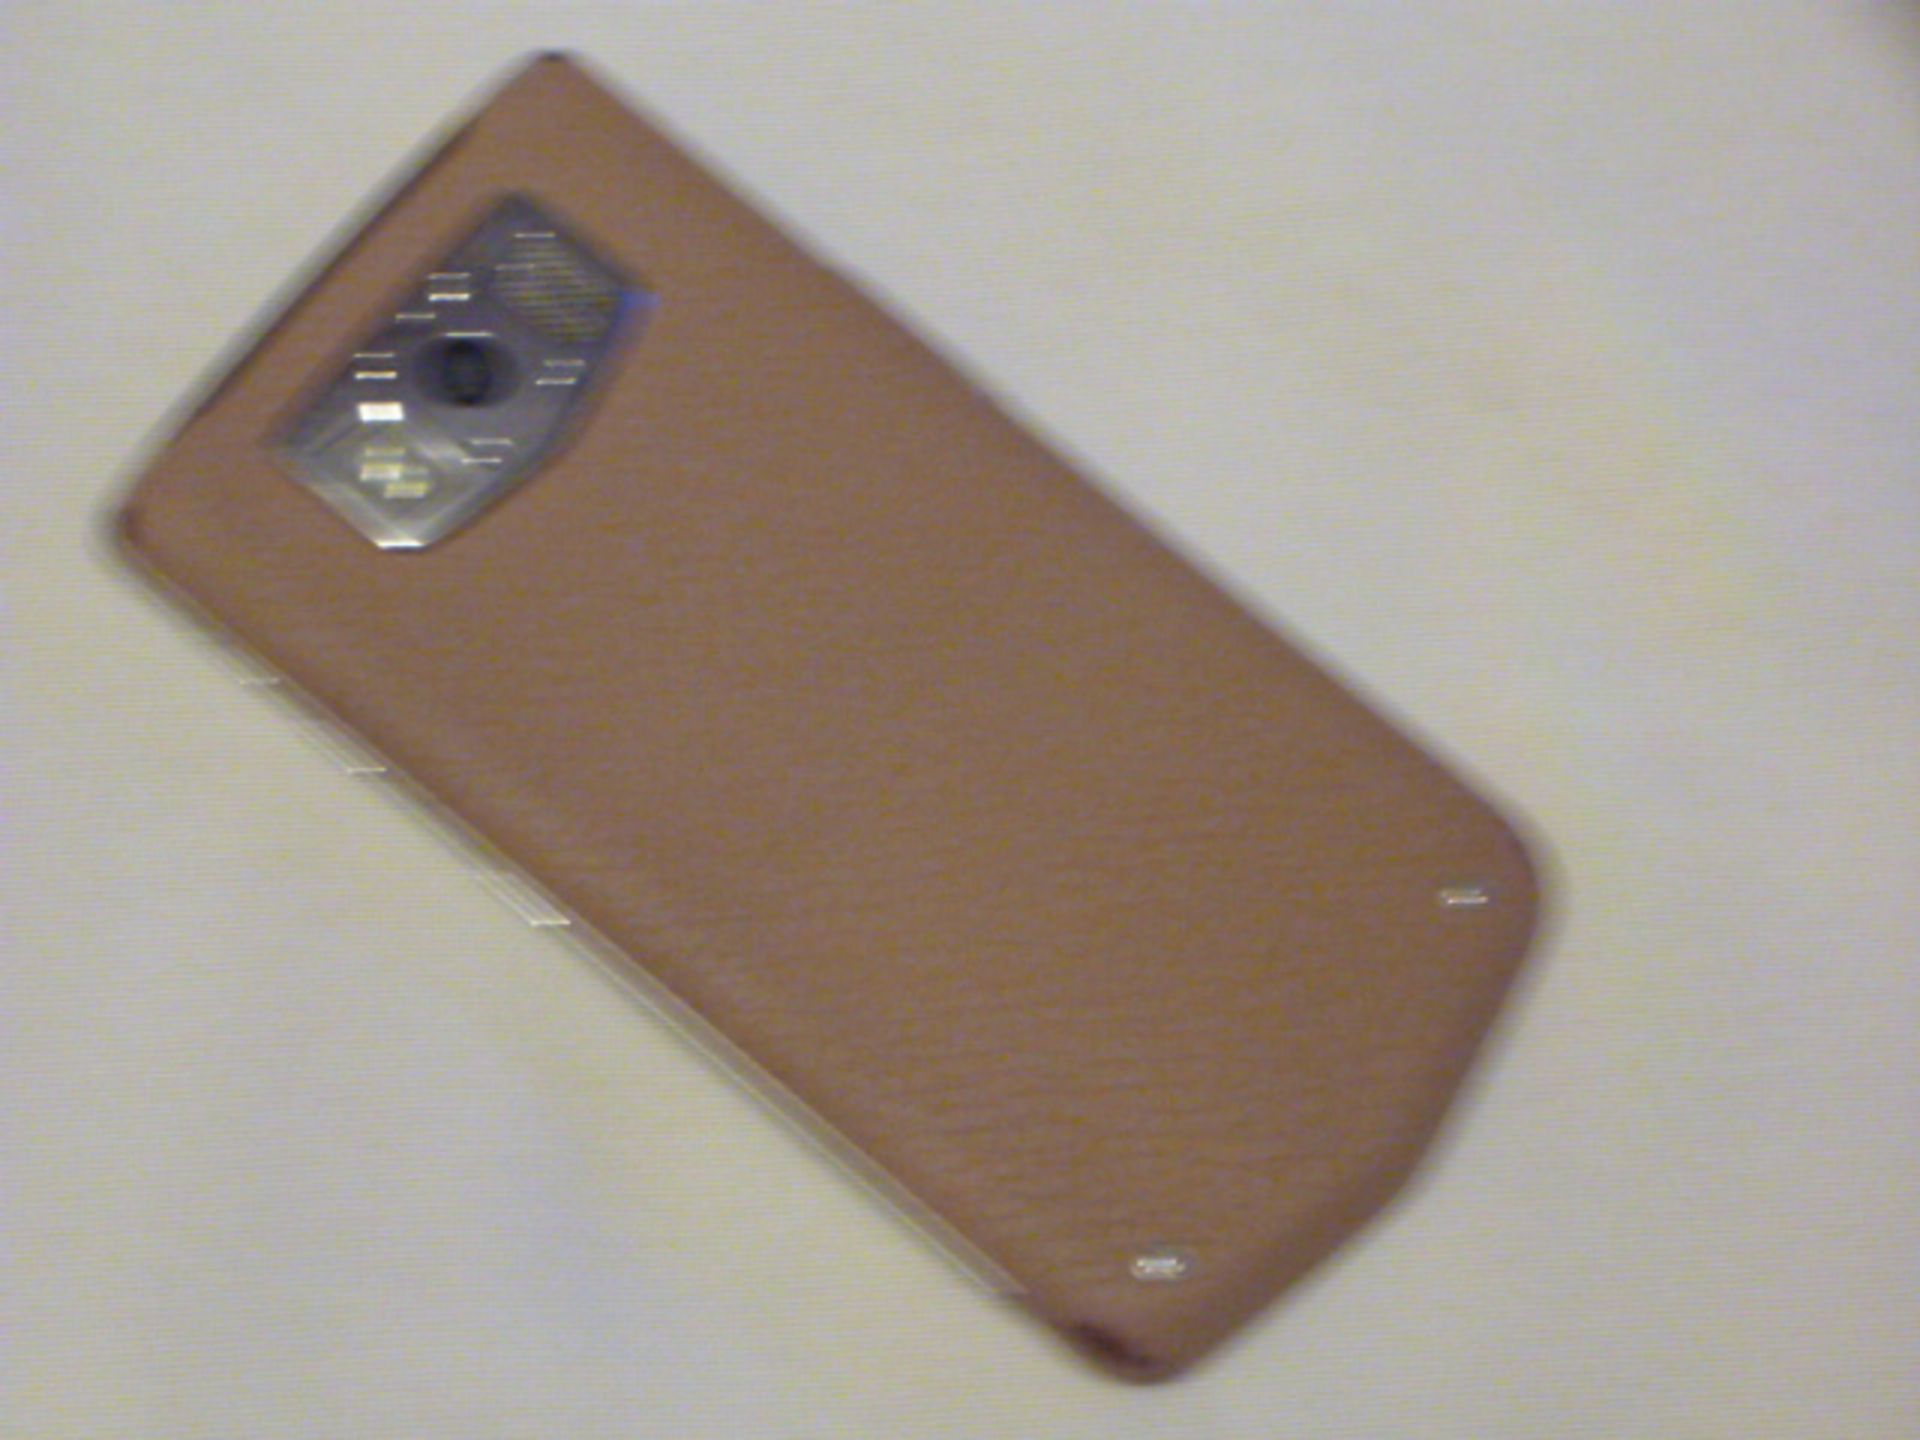 Vertu Constellation Cappuccino Touch Phone. S/N V-060512, Courtesy Phone. Comes with Sales Pack, - Image 2 of 3